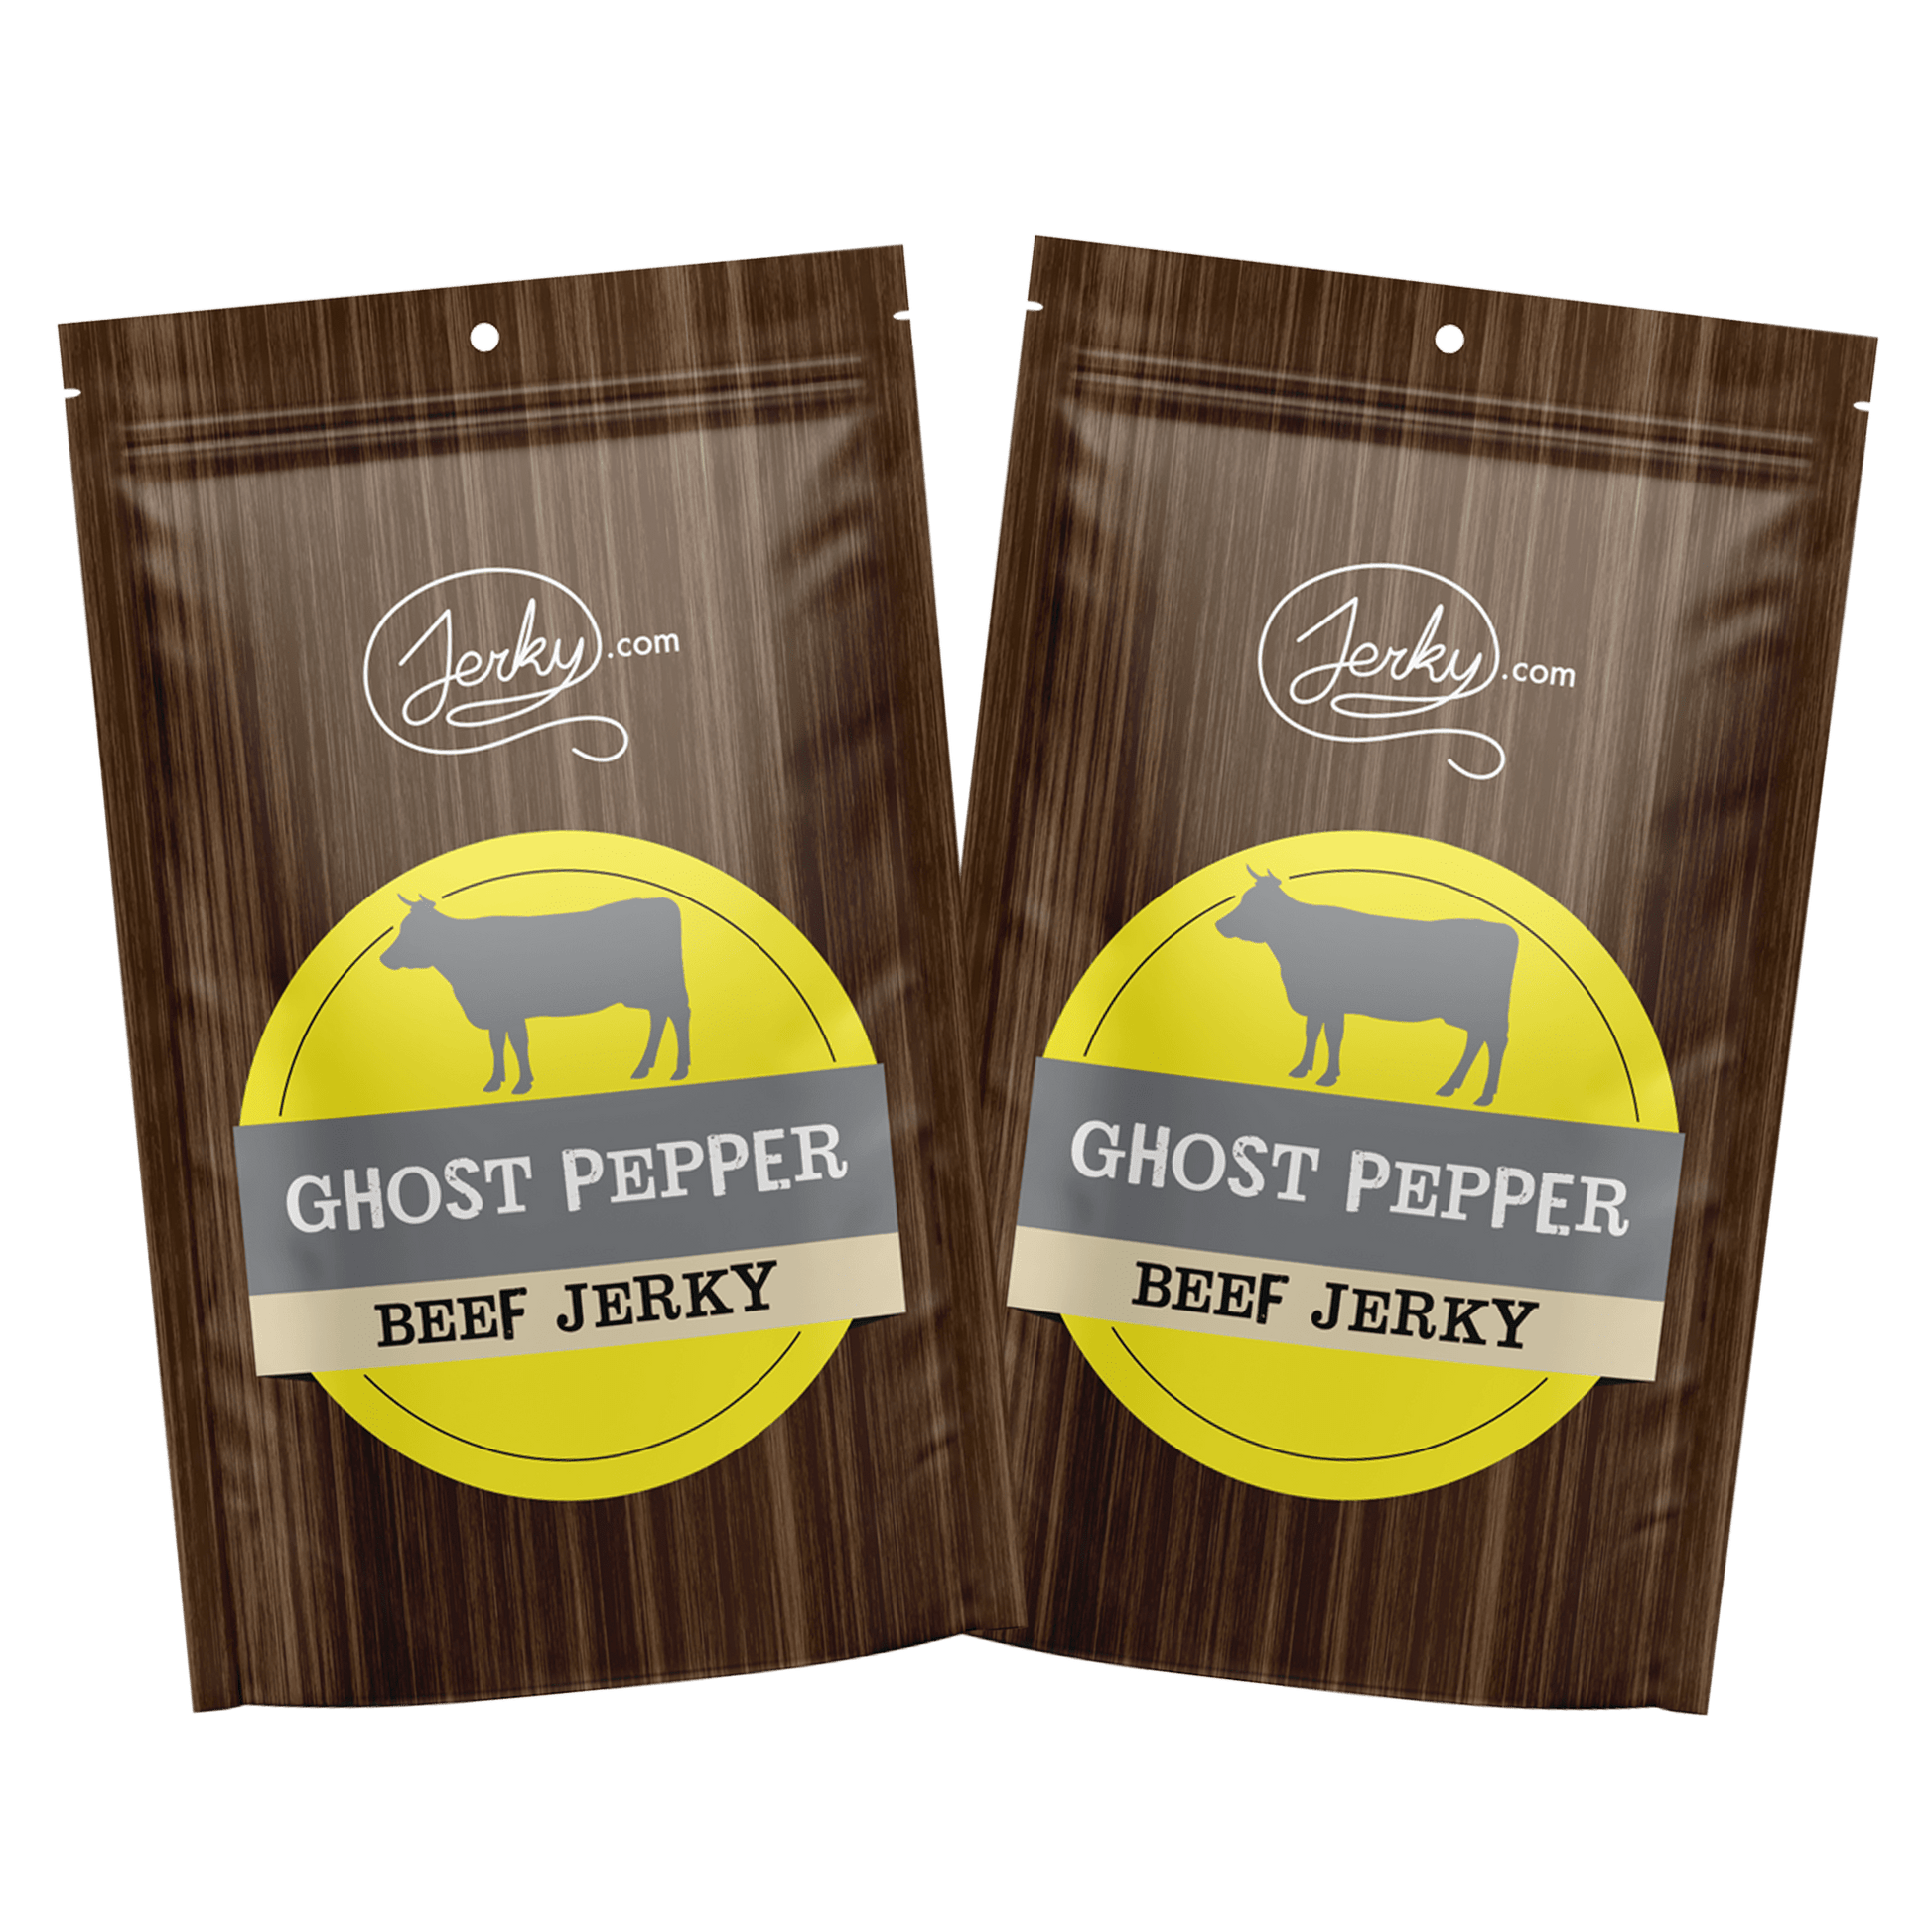 All-Natural Beef Jerky - Ghost Pepper by Jerky.com